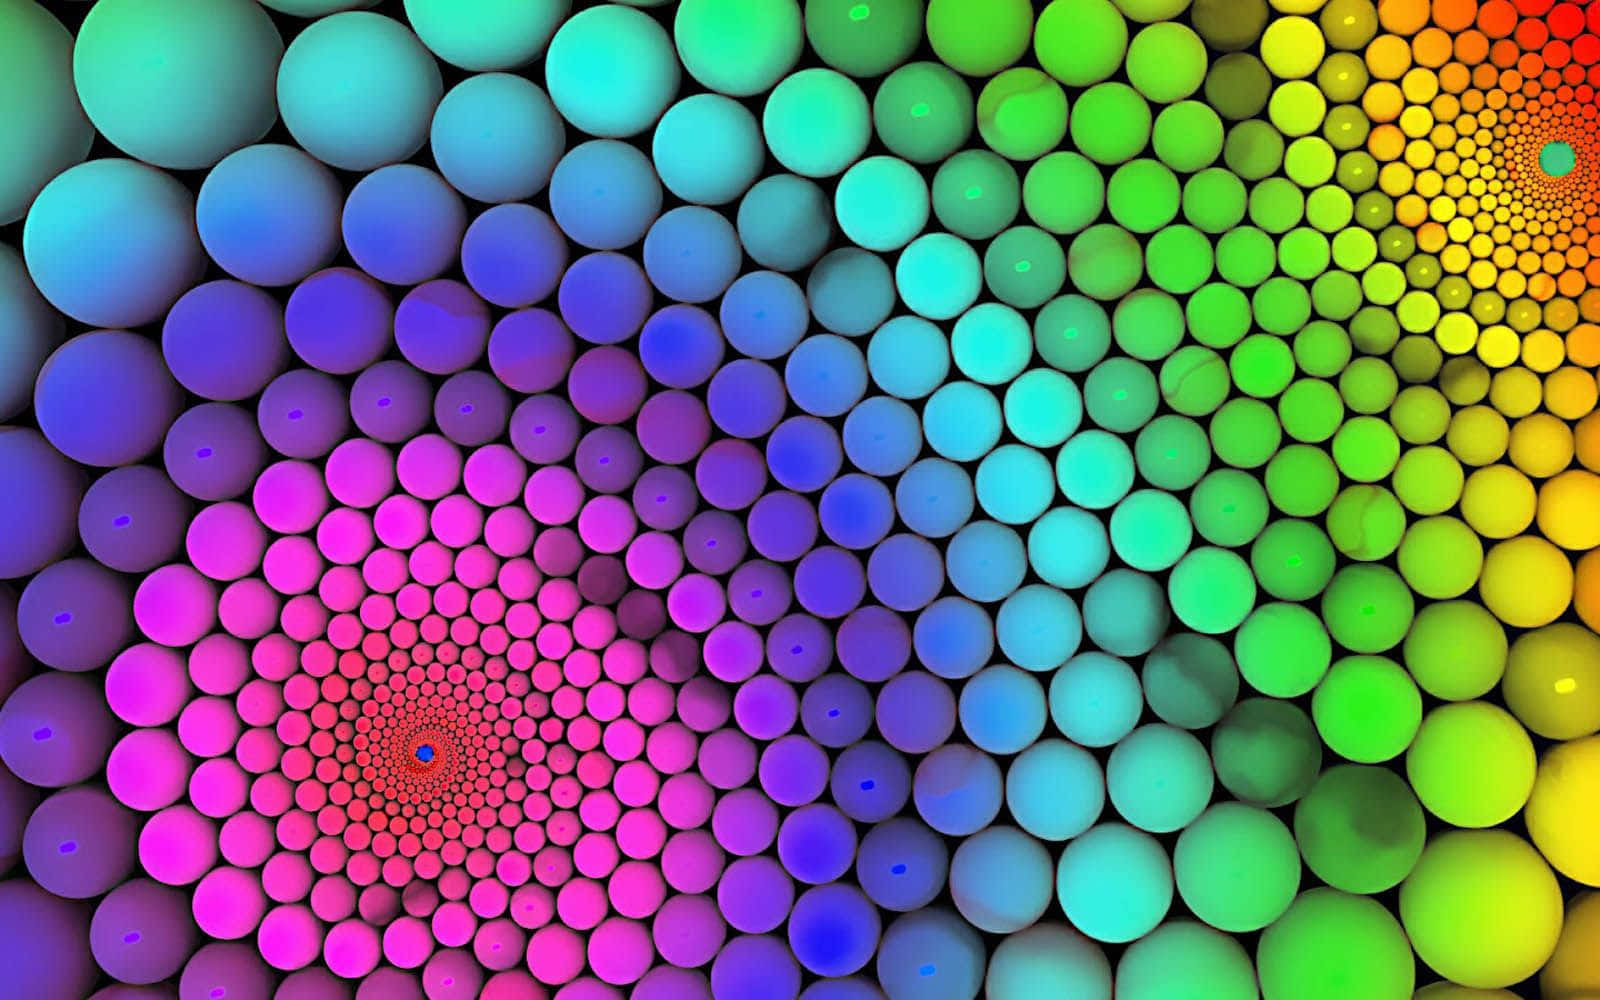 A Colorful Abstract Background With Circles